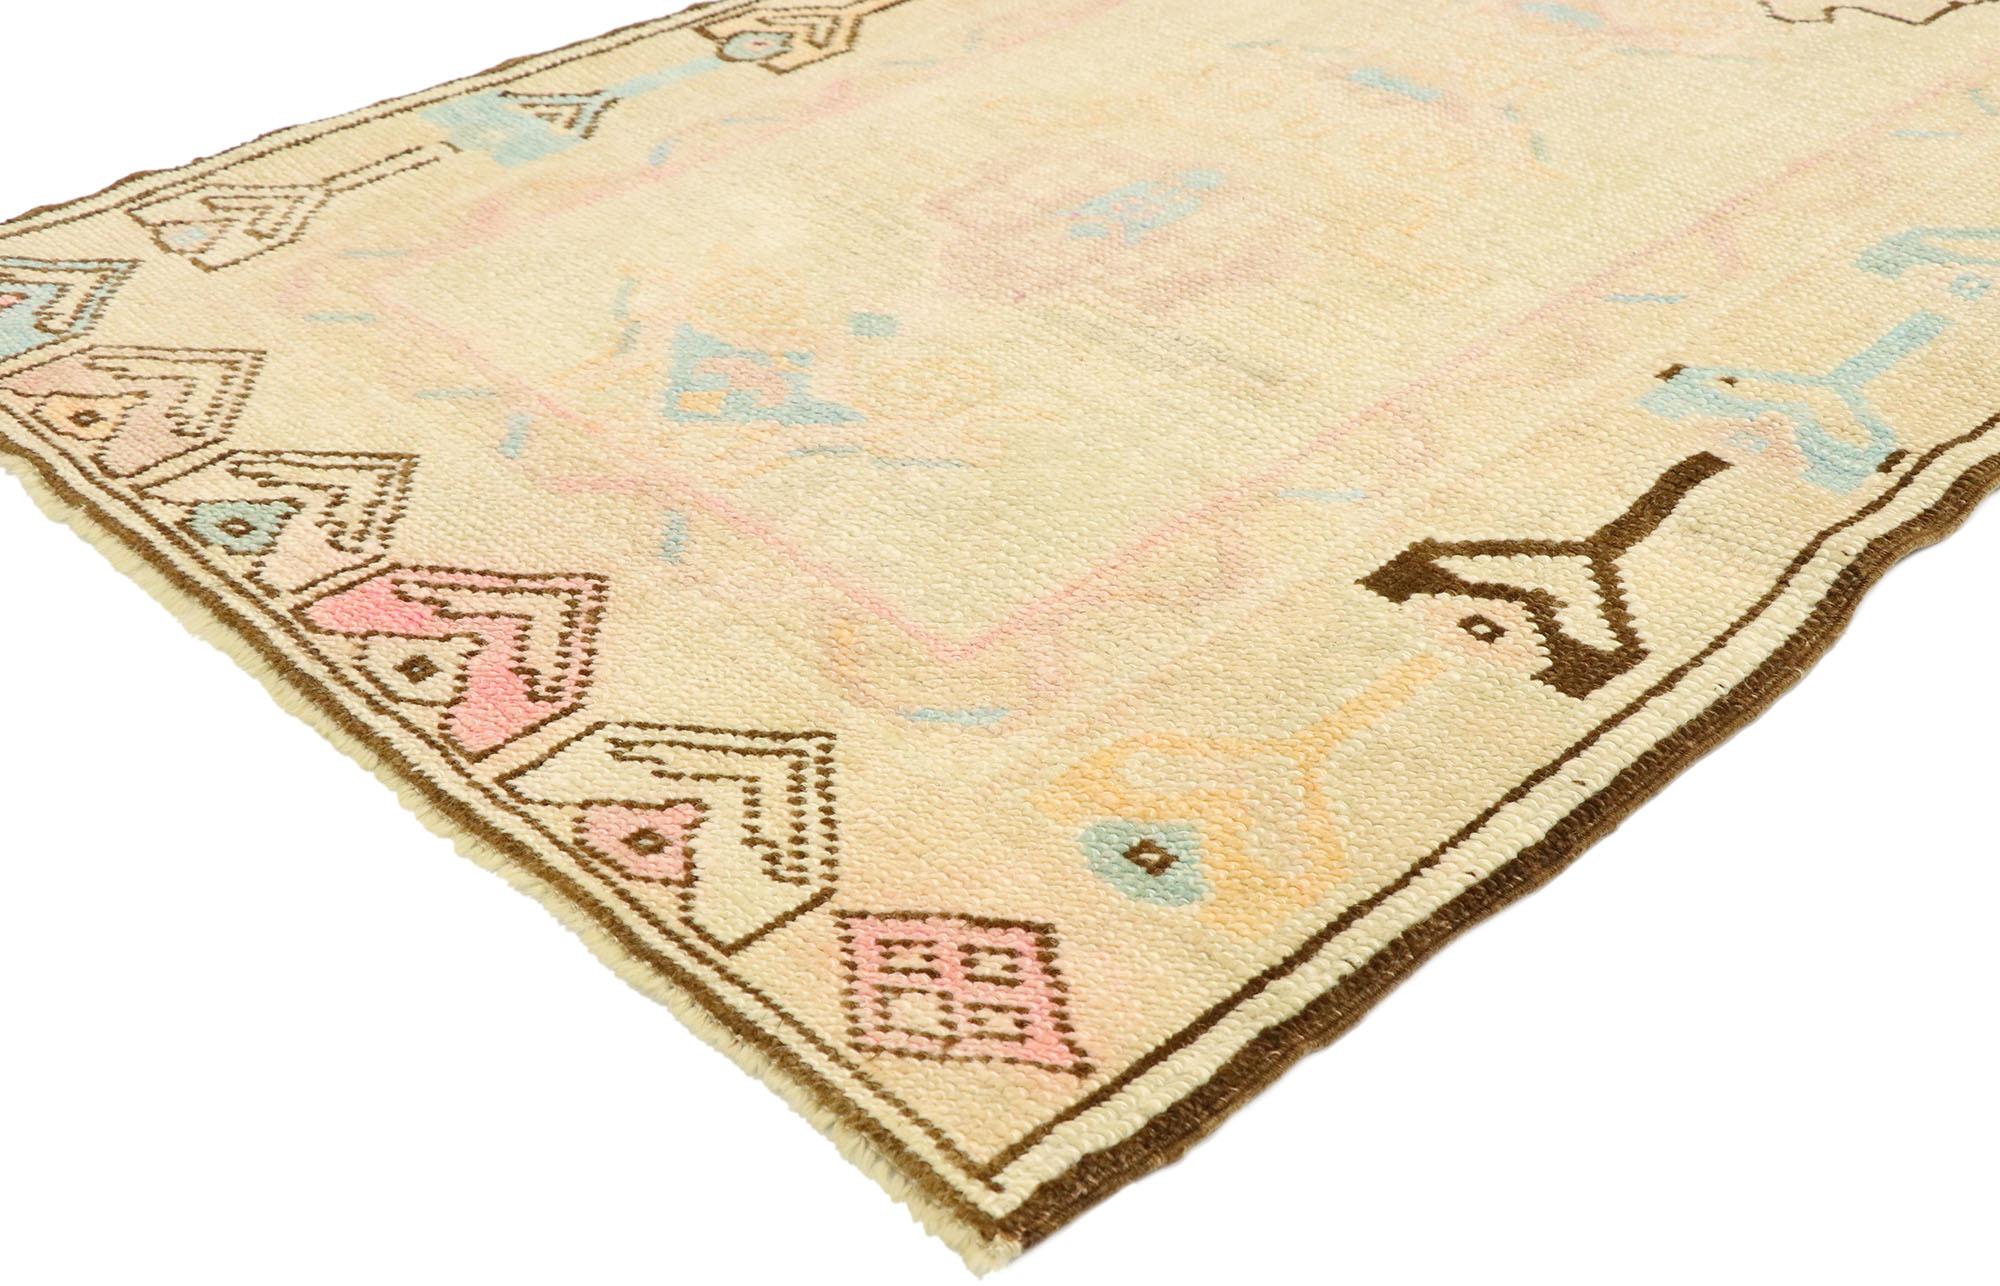 52927, vintage Turkish Oushak runner with Romantic Georgian Cottage French style 03'00 x 09'07. Soft, bespoke vibes meet English Country Cottage style in this hand knotted wool vintage Turkish Oushak hallway runner. The champagne-beige antique